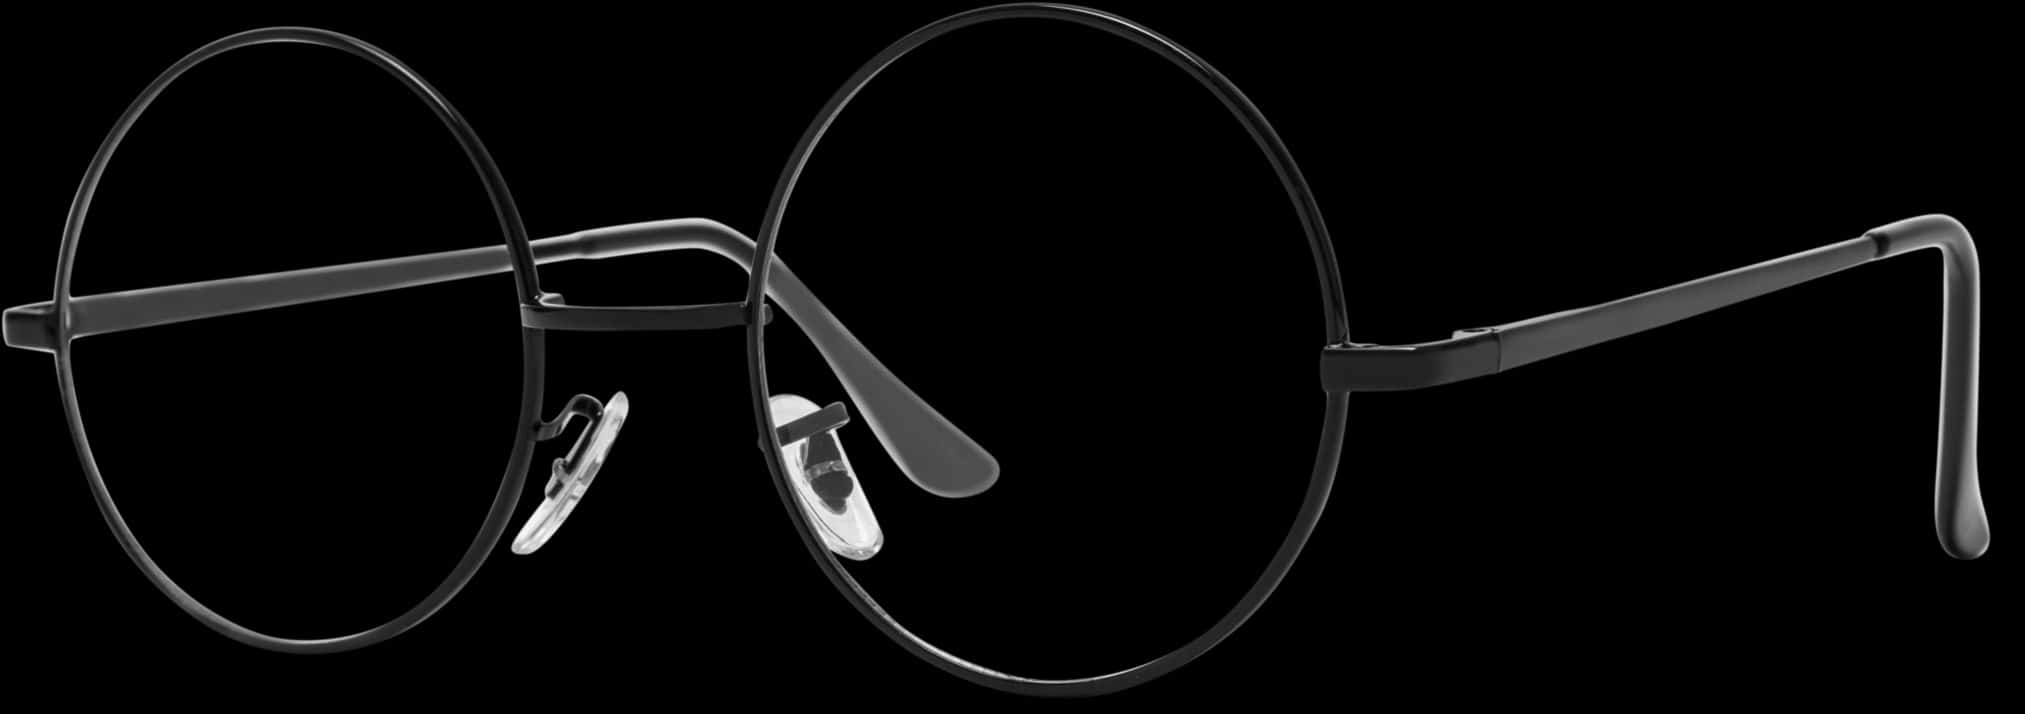 Black Round Glasses Isolated PNG